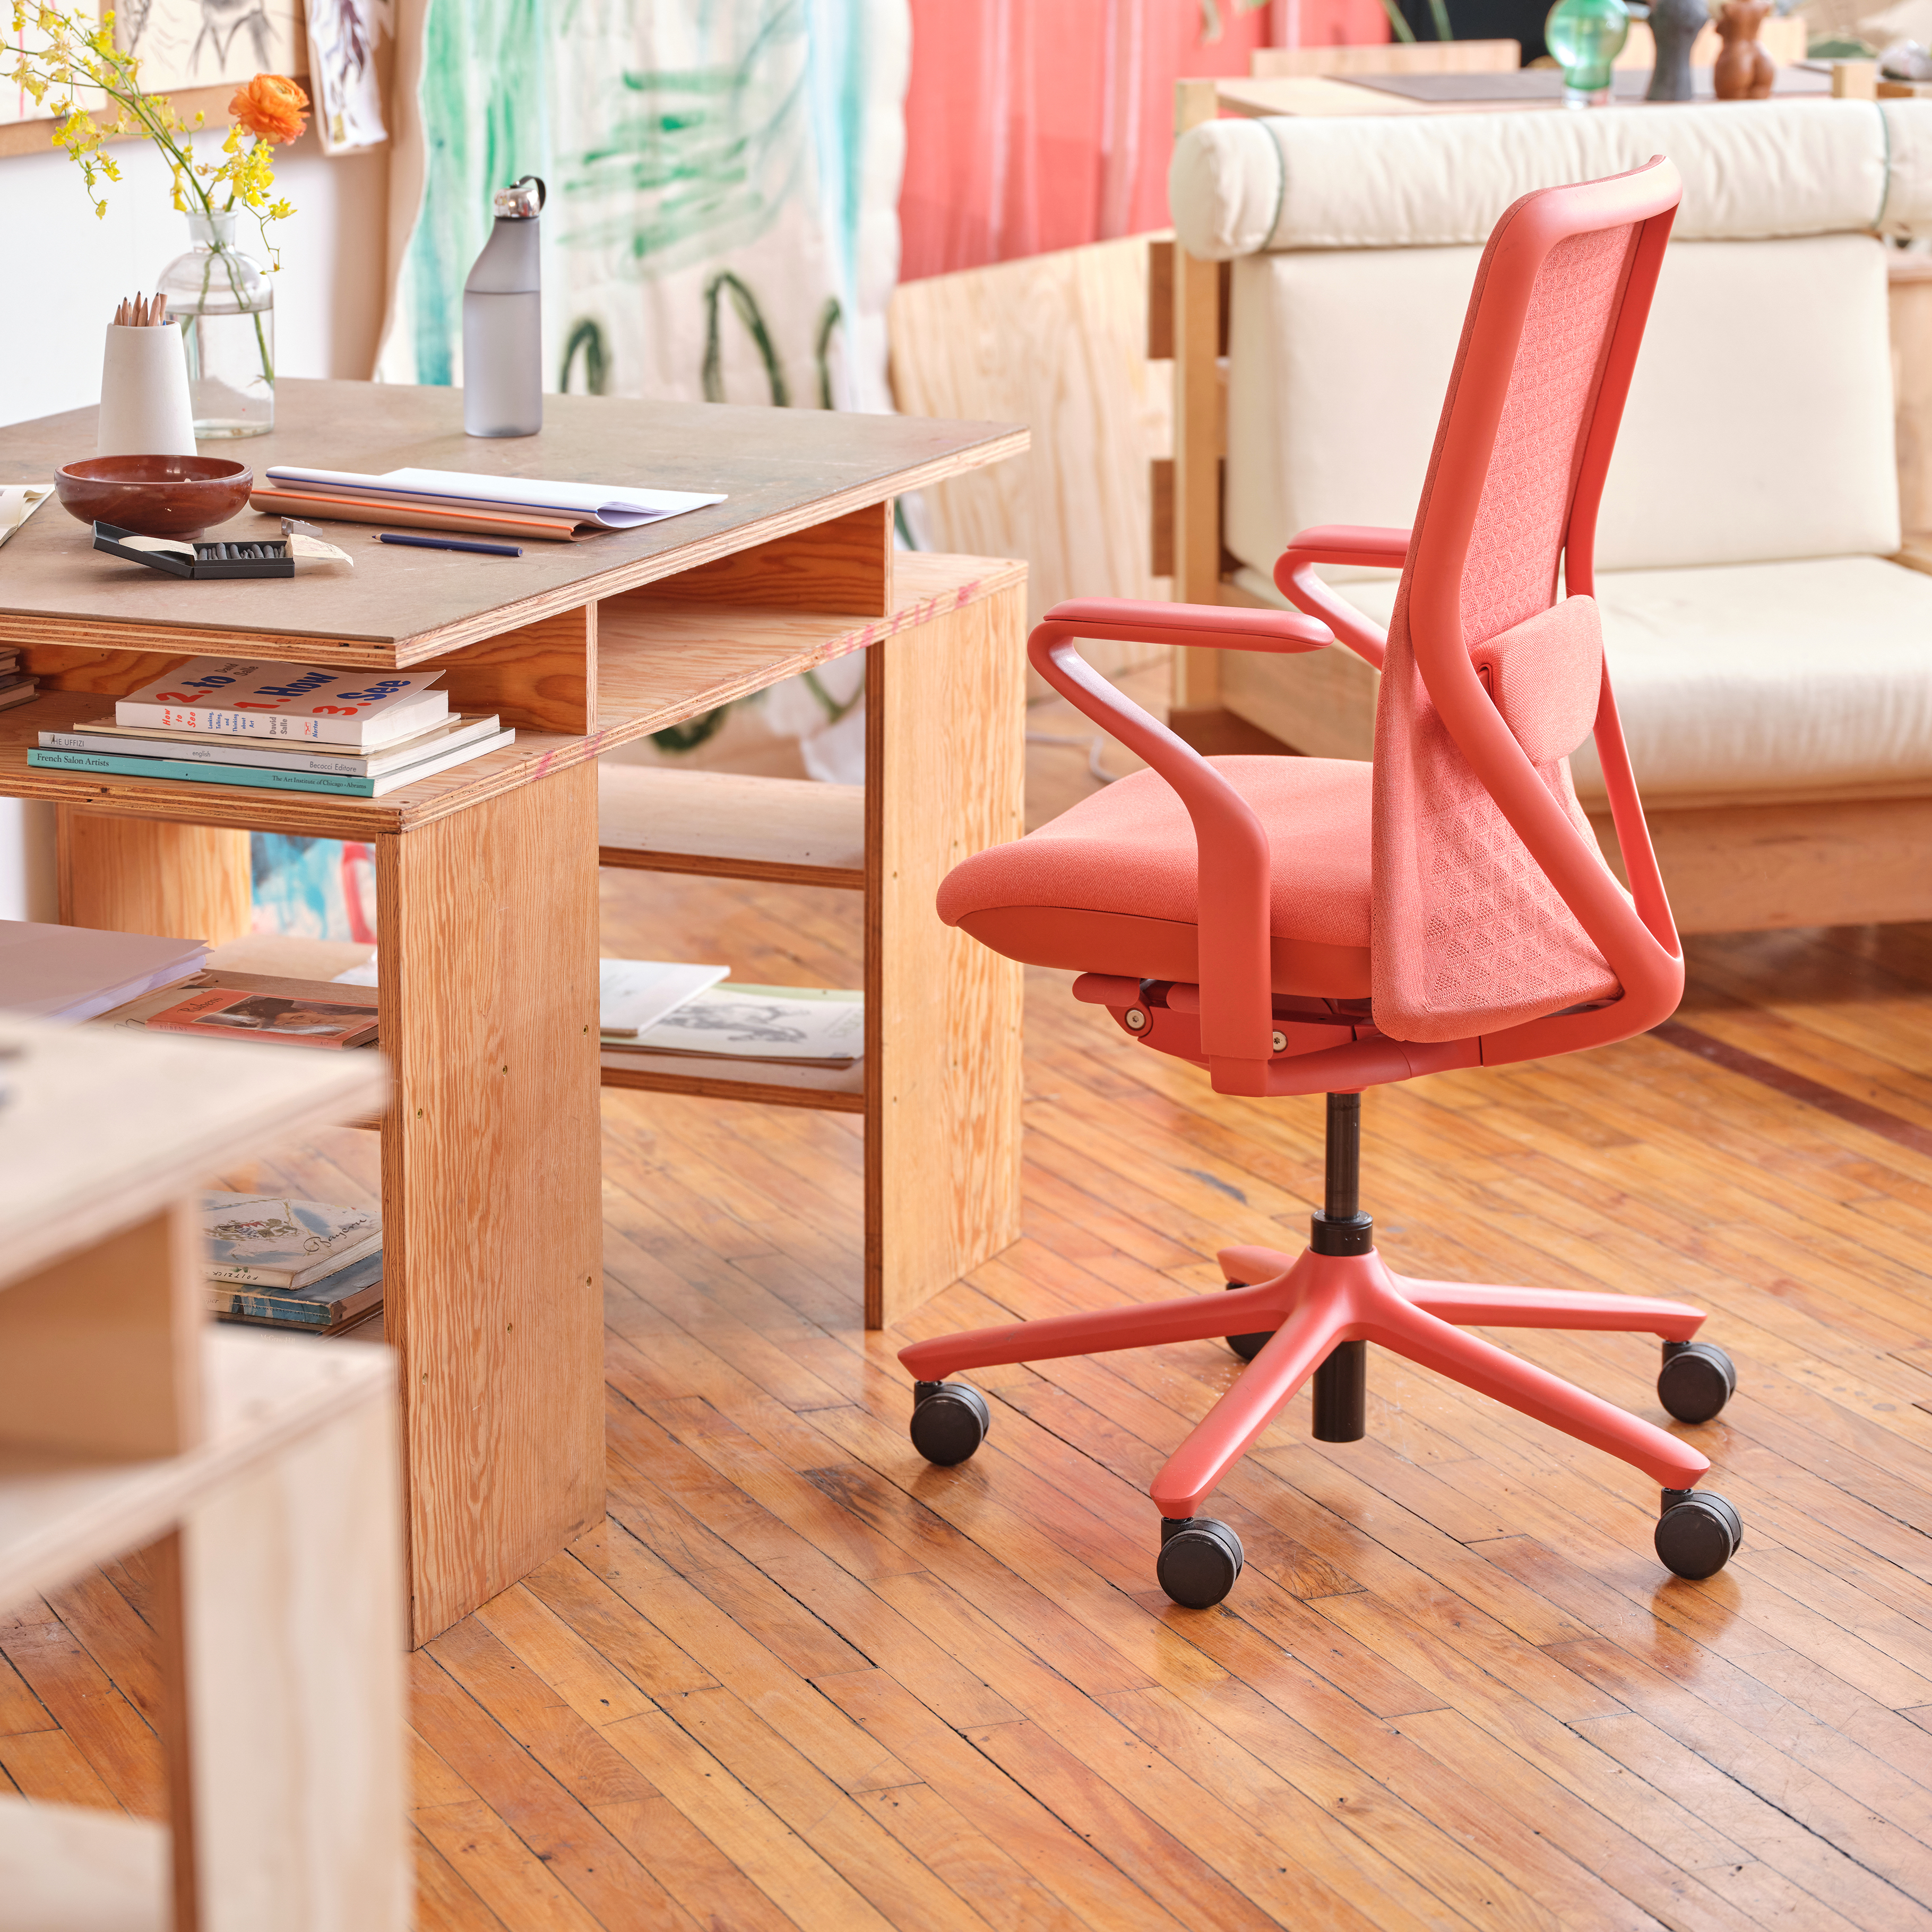 The back of a coral-colored office chair inside of an airy home-office space.